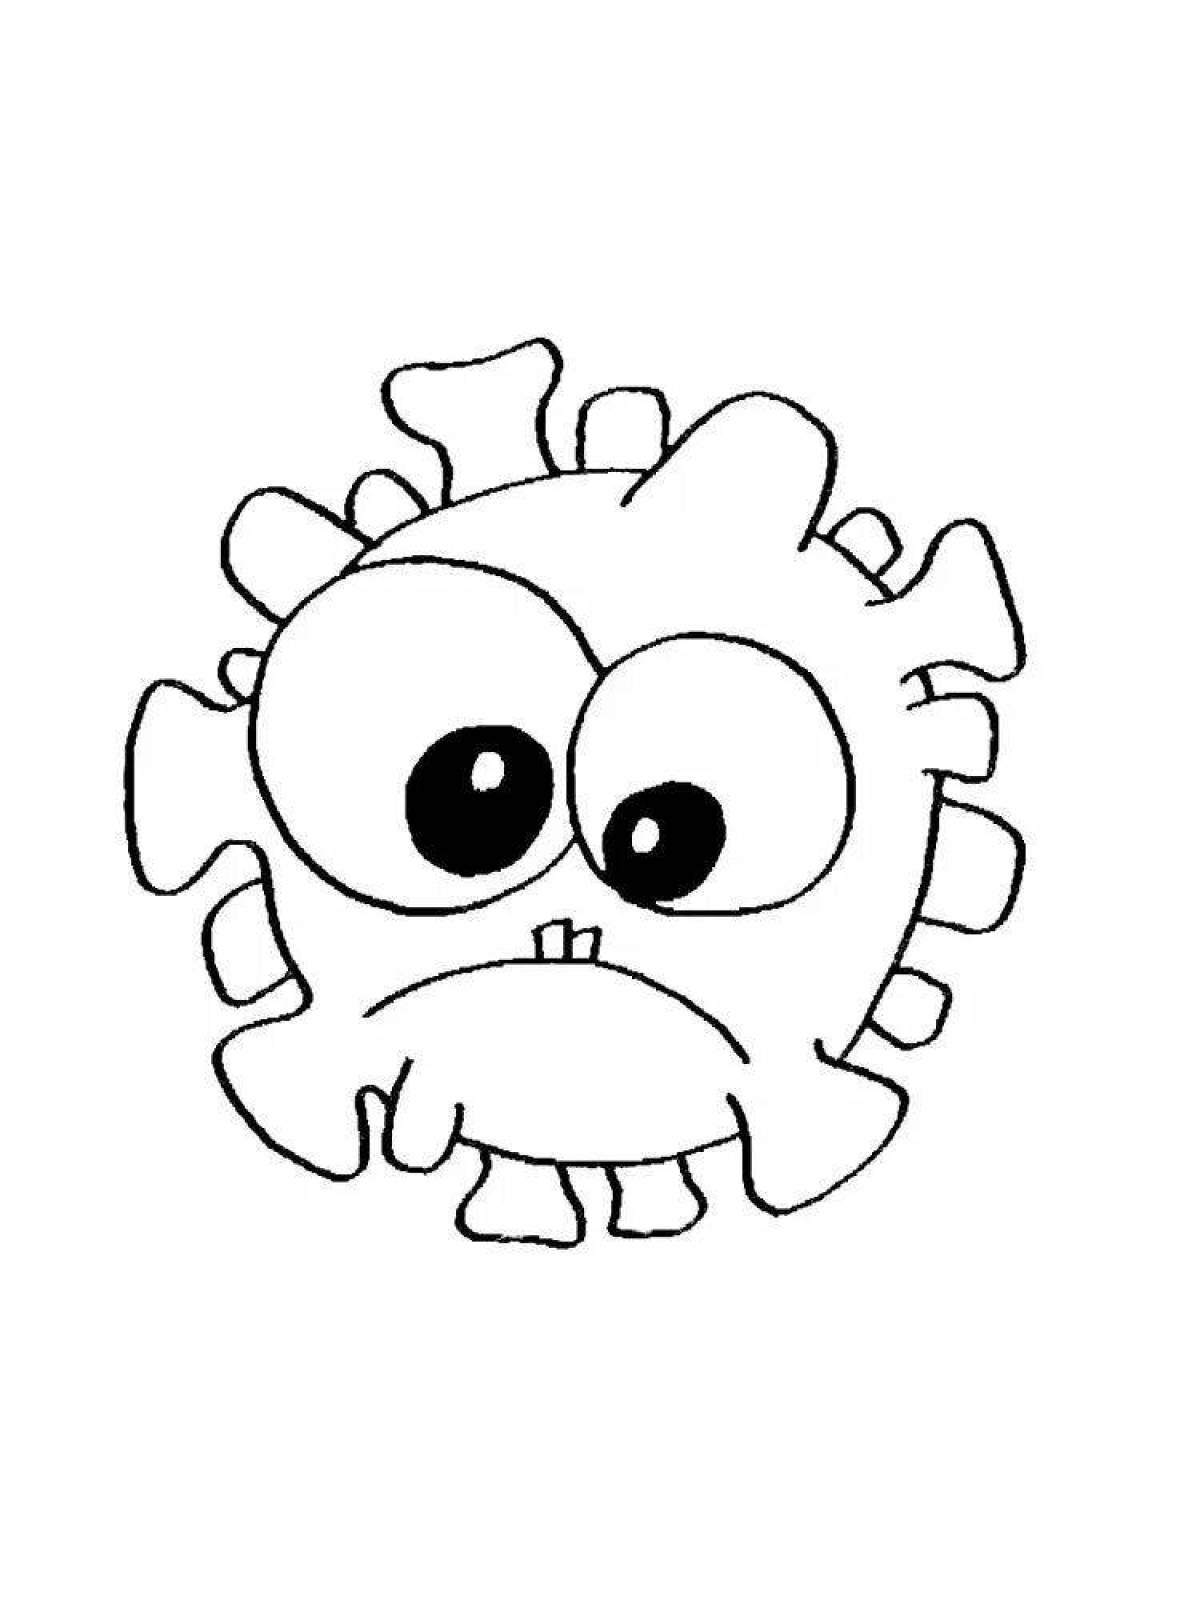 Charming virus coloring page